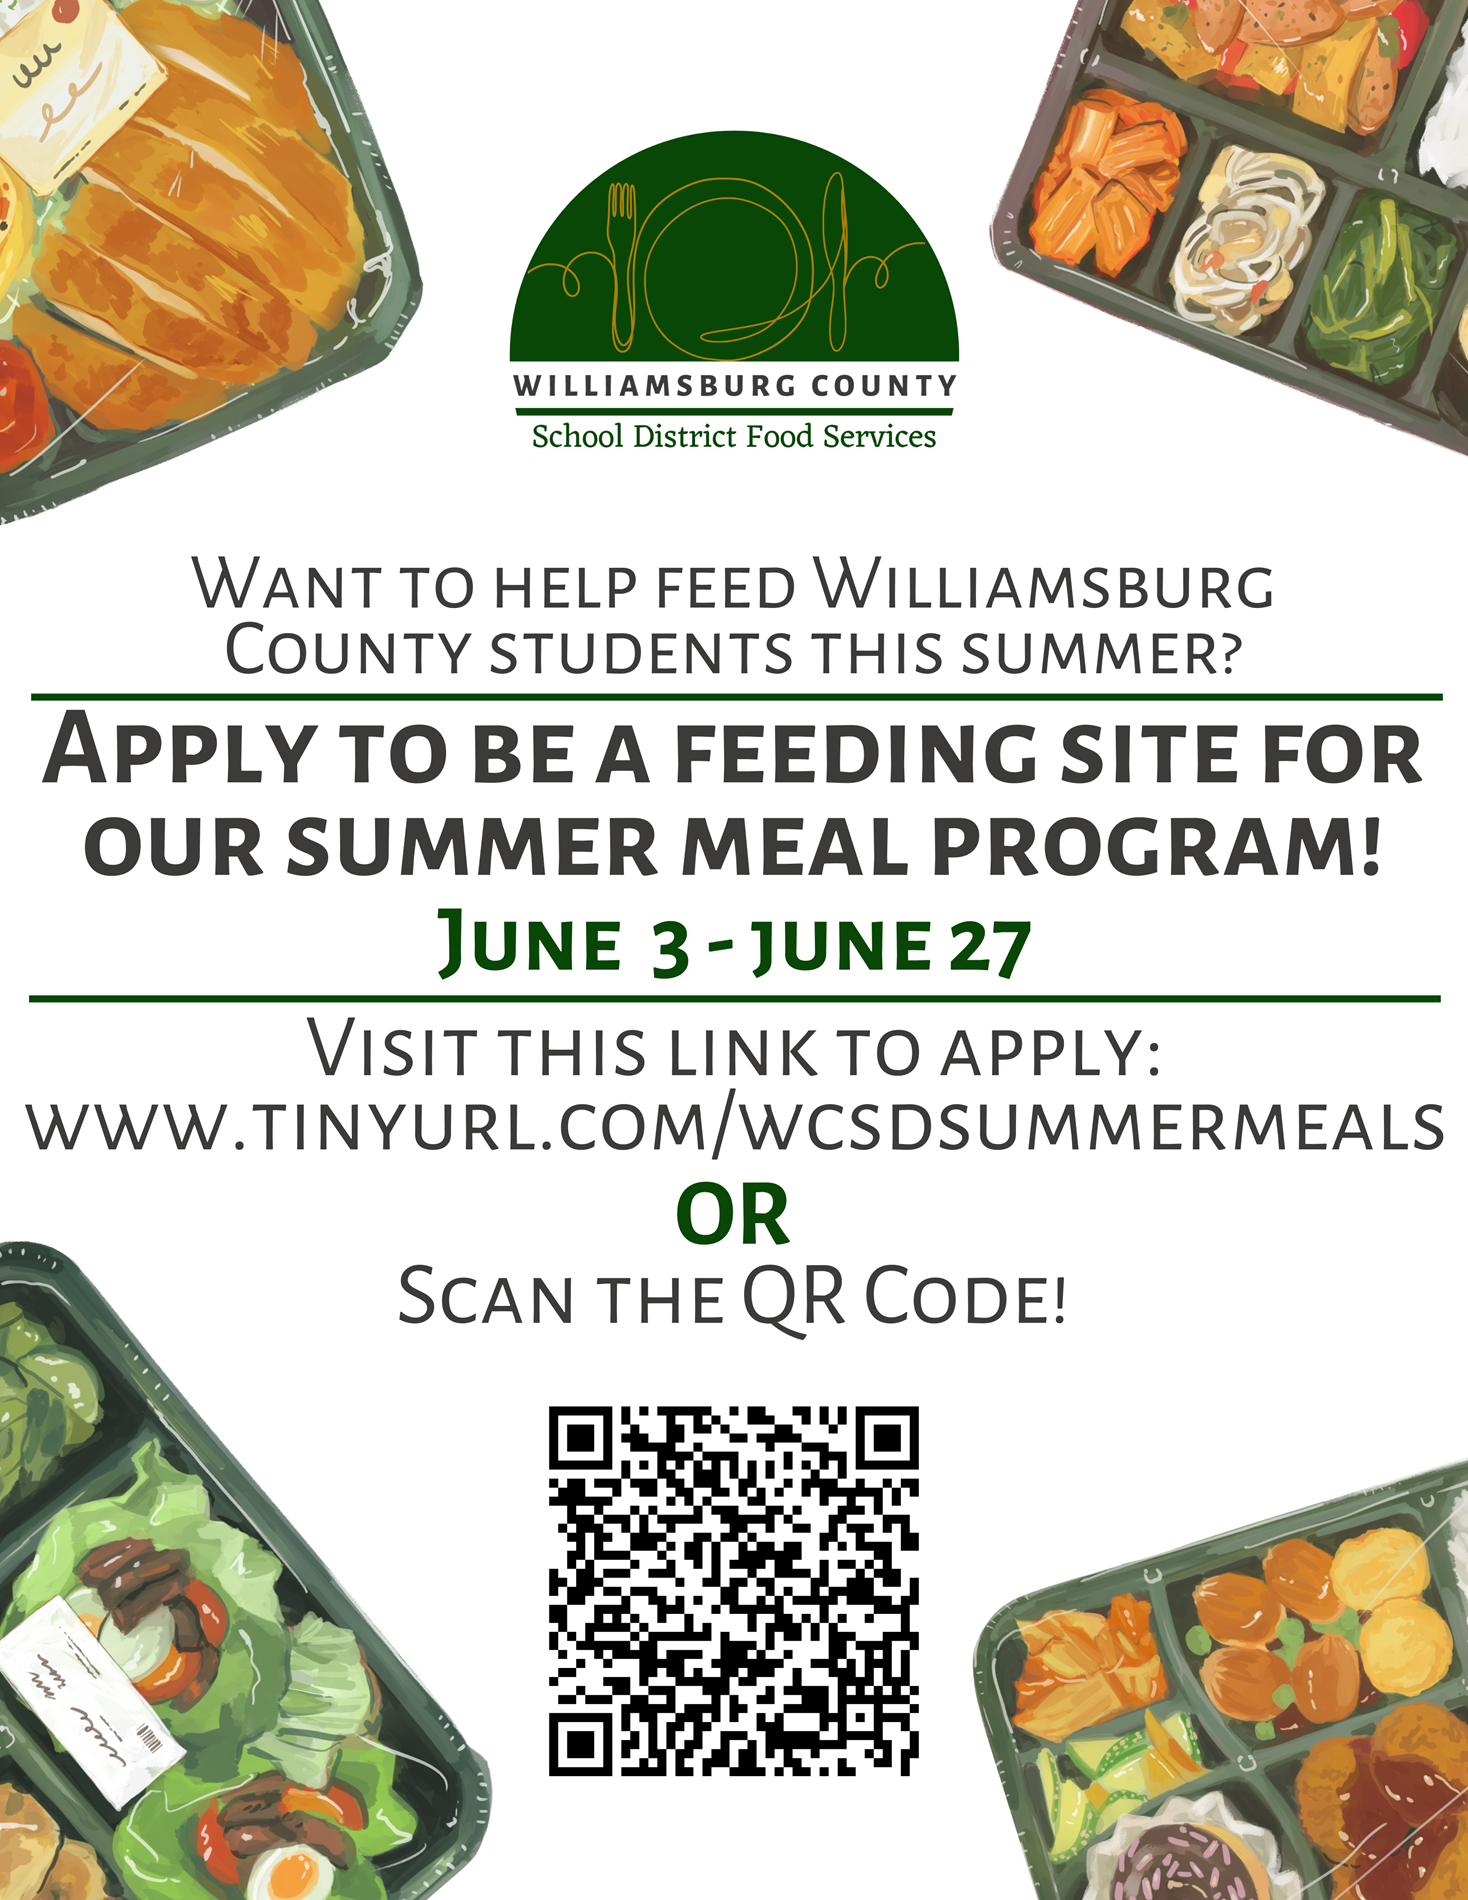 Flyer-Williamsburg County School District Food Services. Want to help feed Williamsburg County Students this summer? Apply to be a feeding site for our summer meal program! June 3-June 27. Visit this link to apply: www.tinyurl.com/wcsdsummermeals or scan the QR code! (picture of QR code) 